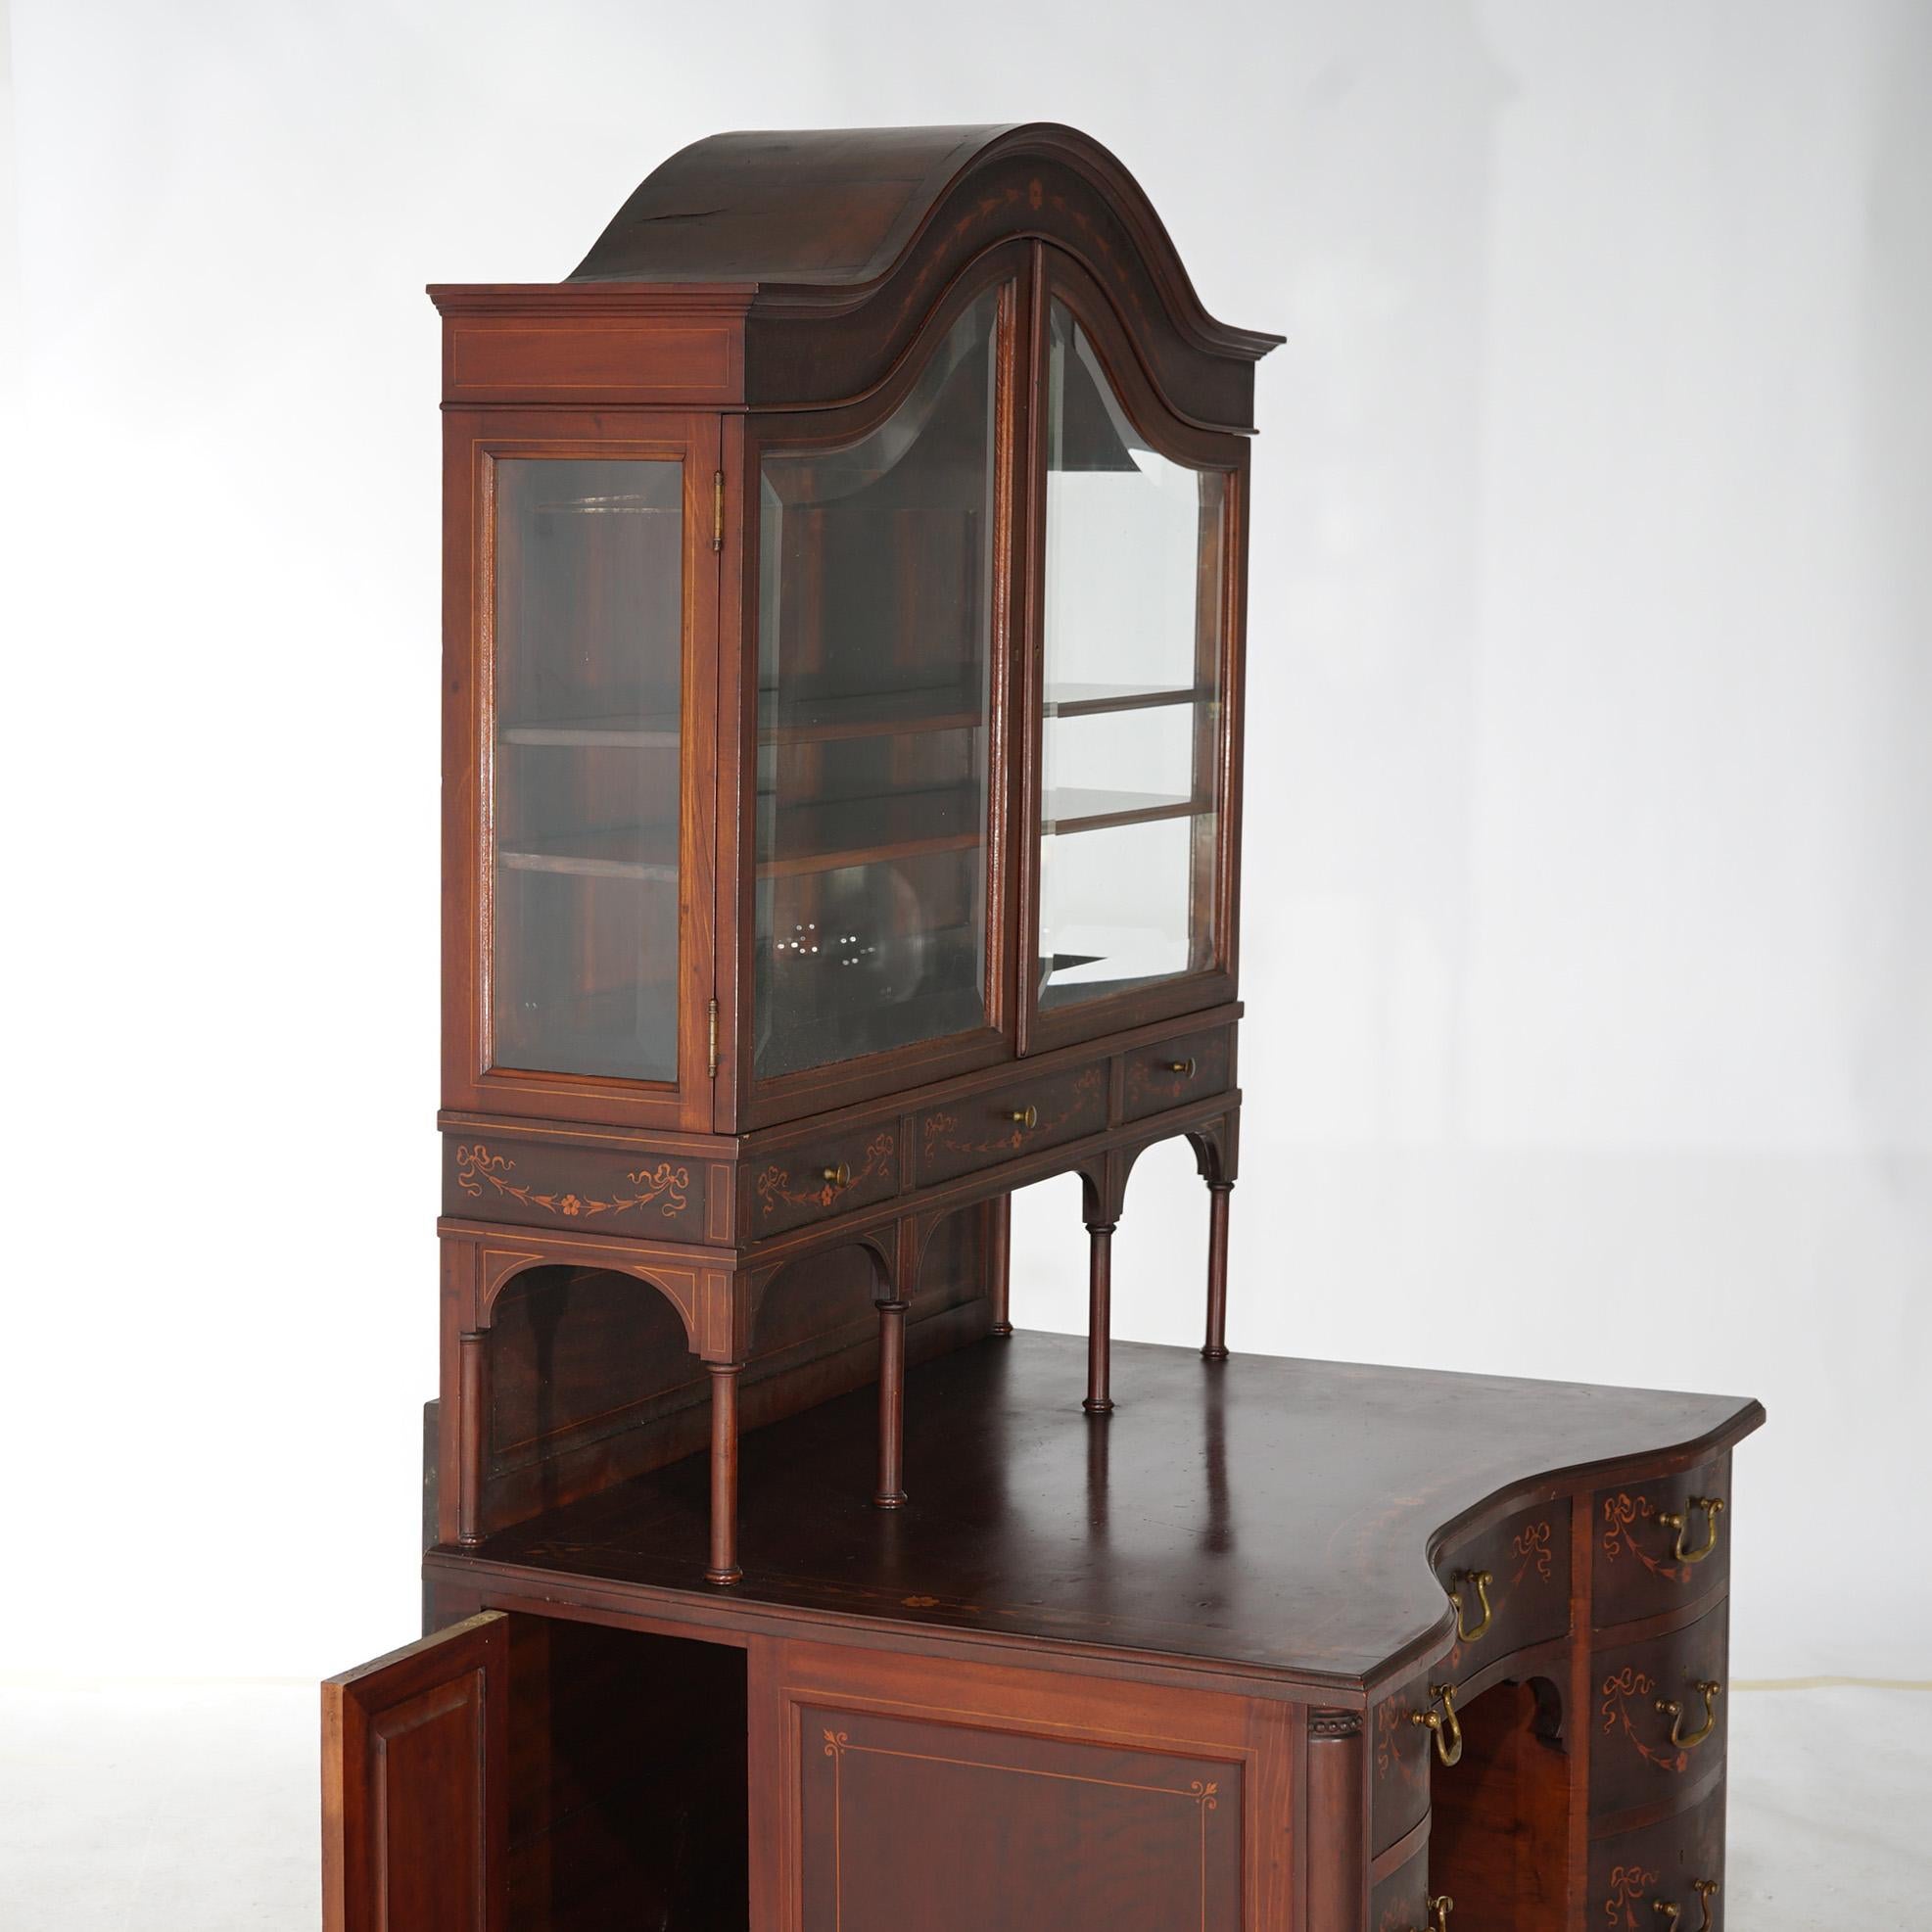 An antique secretary in the manner of Horner offers mahogany construction with upper having glass enclosed display in arched form with inlaid satinwood floral elements throughout, over lower with paneled case having drawers and cabinet with